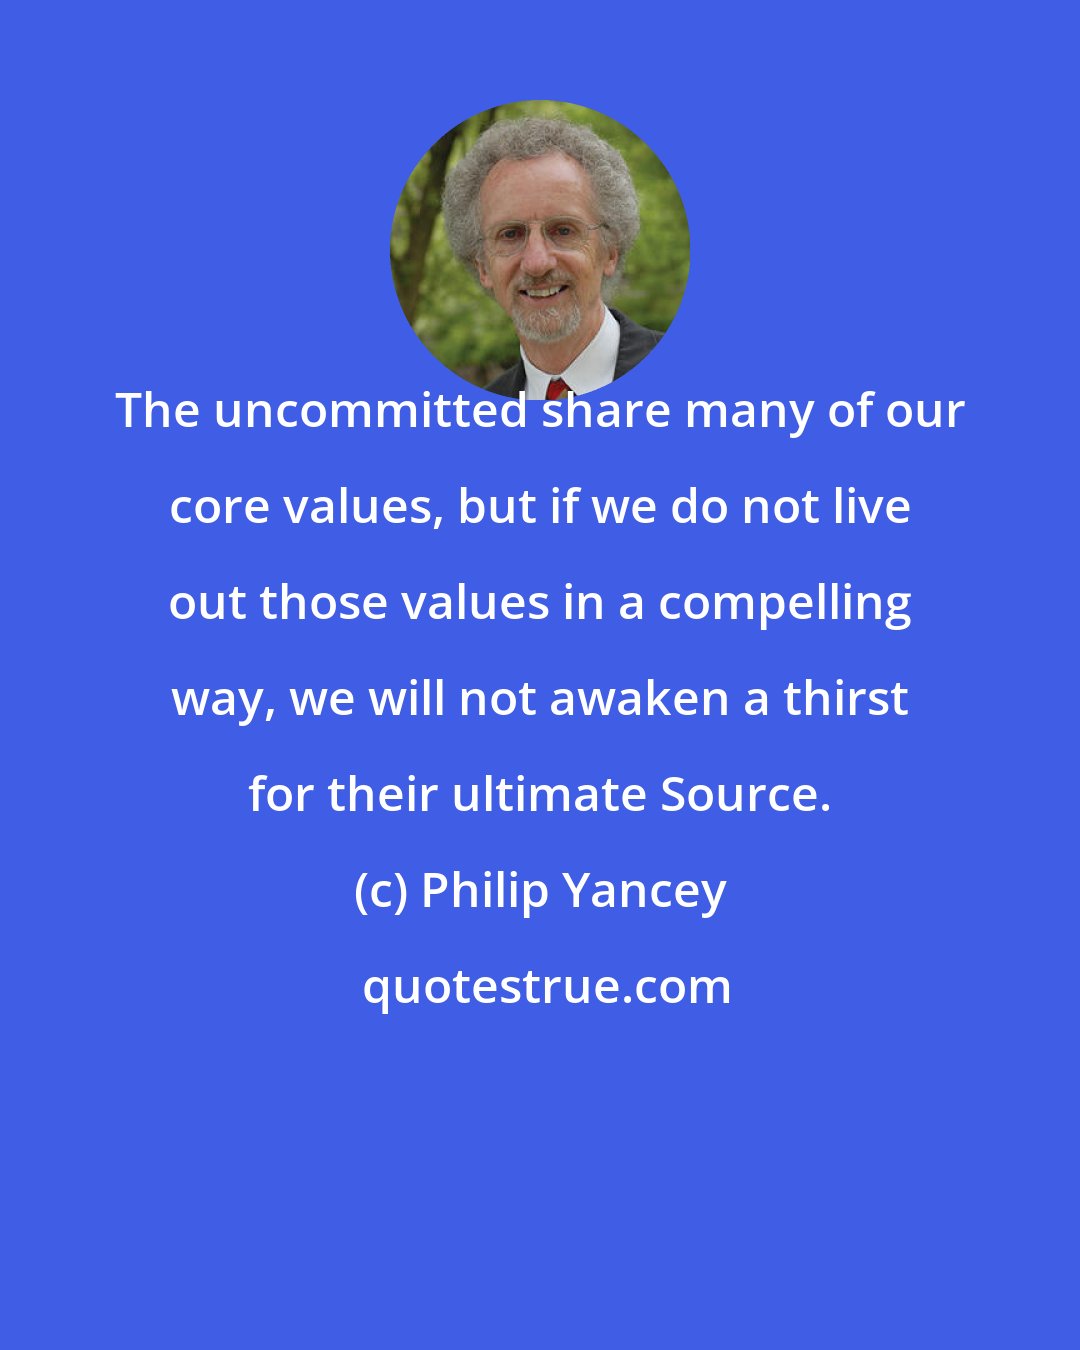 Philip Yancey: The uncommitted share many of our core values, but if we do not live out those values in a compelling way, we will not awaken a thirst for their ultimate Source.